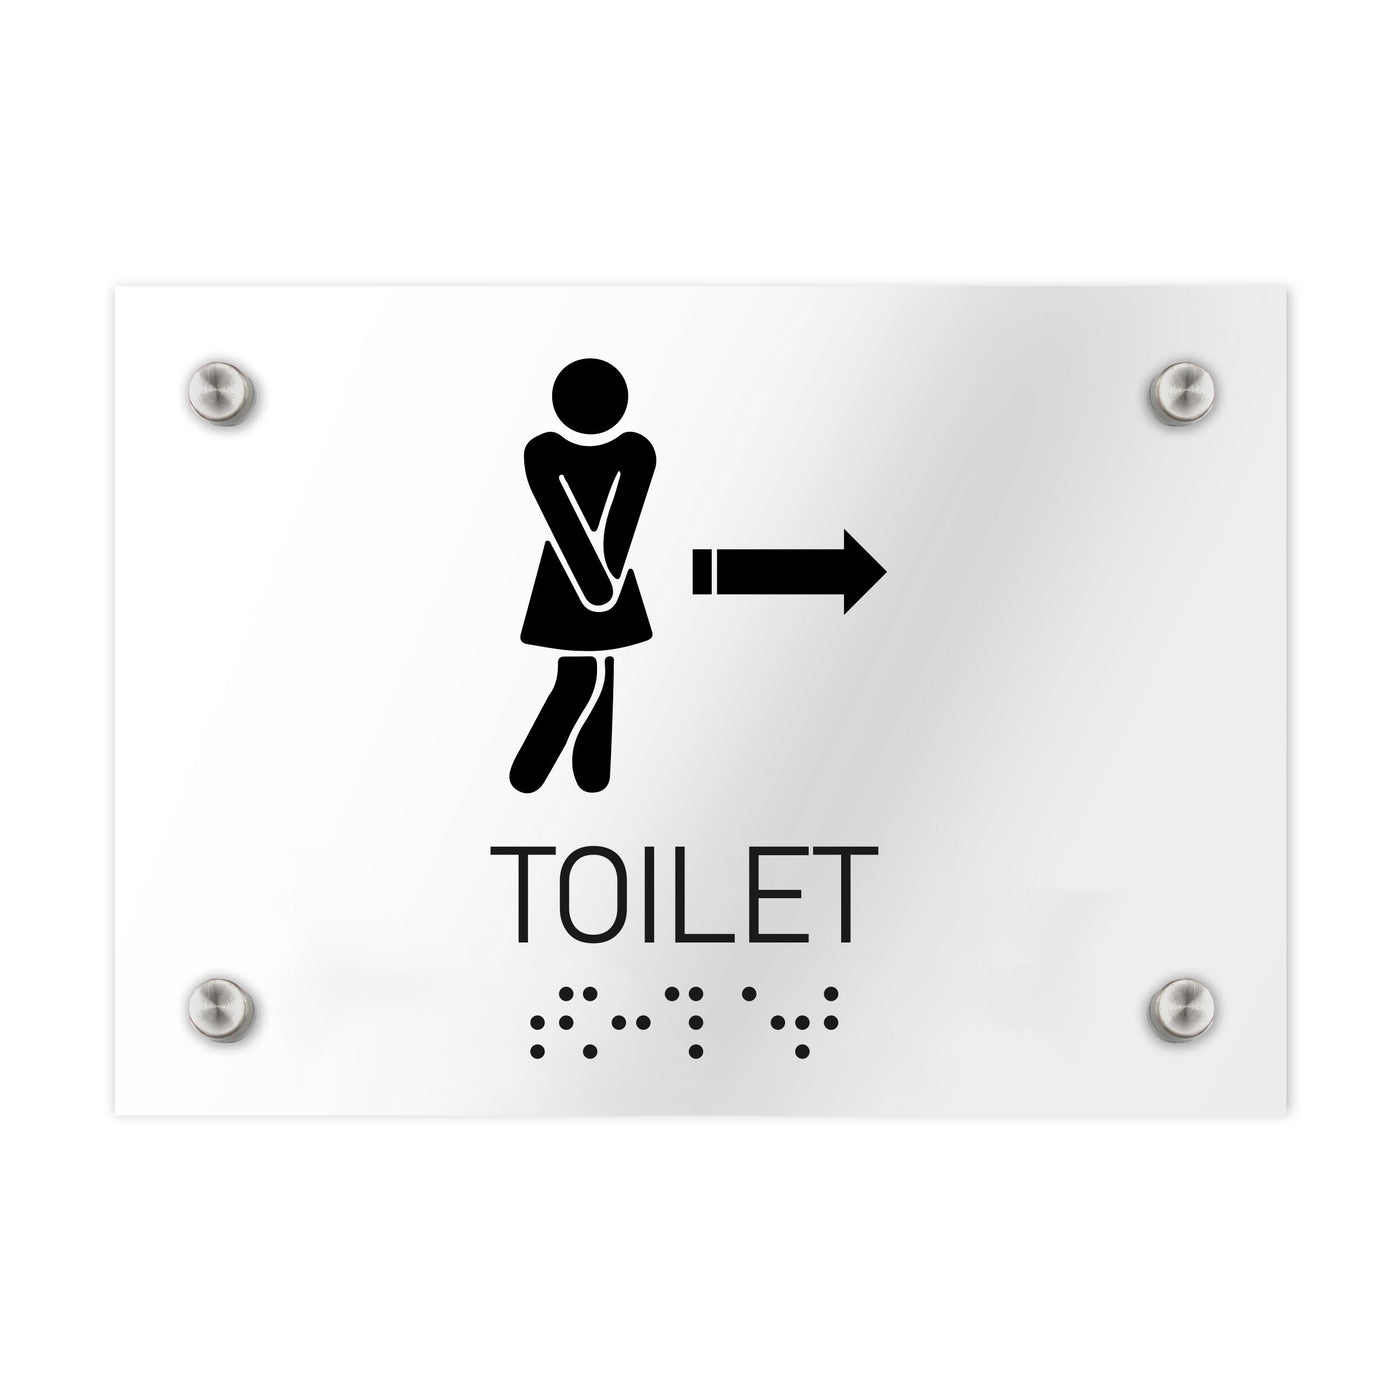 Bathroom Signs - Women Toilet Directional Sign - Clear Acrylic